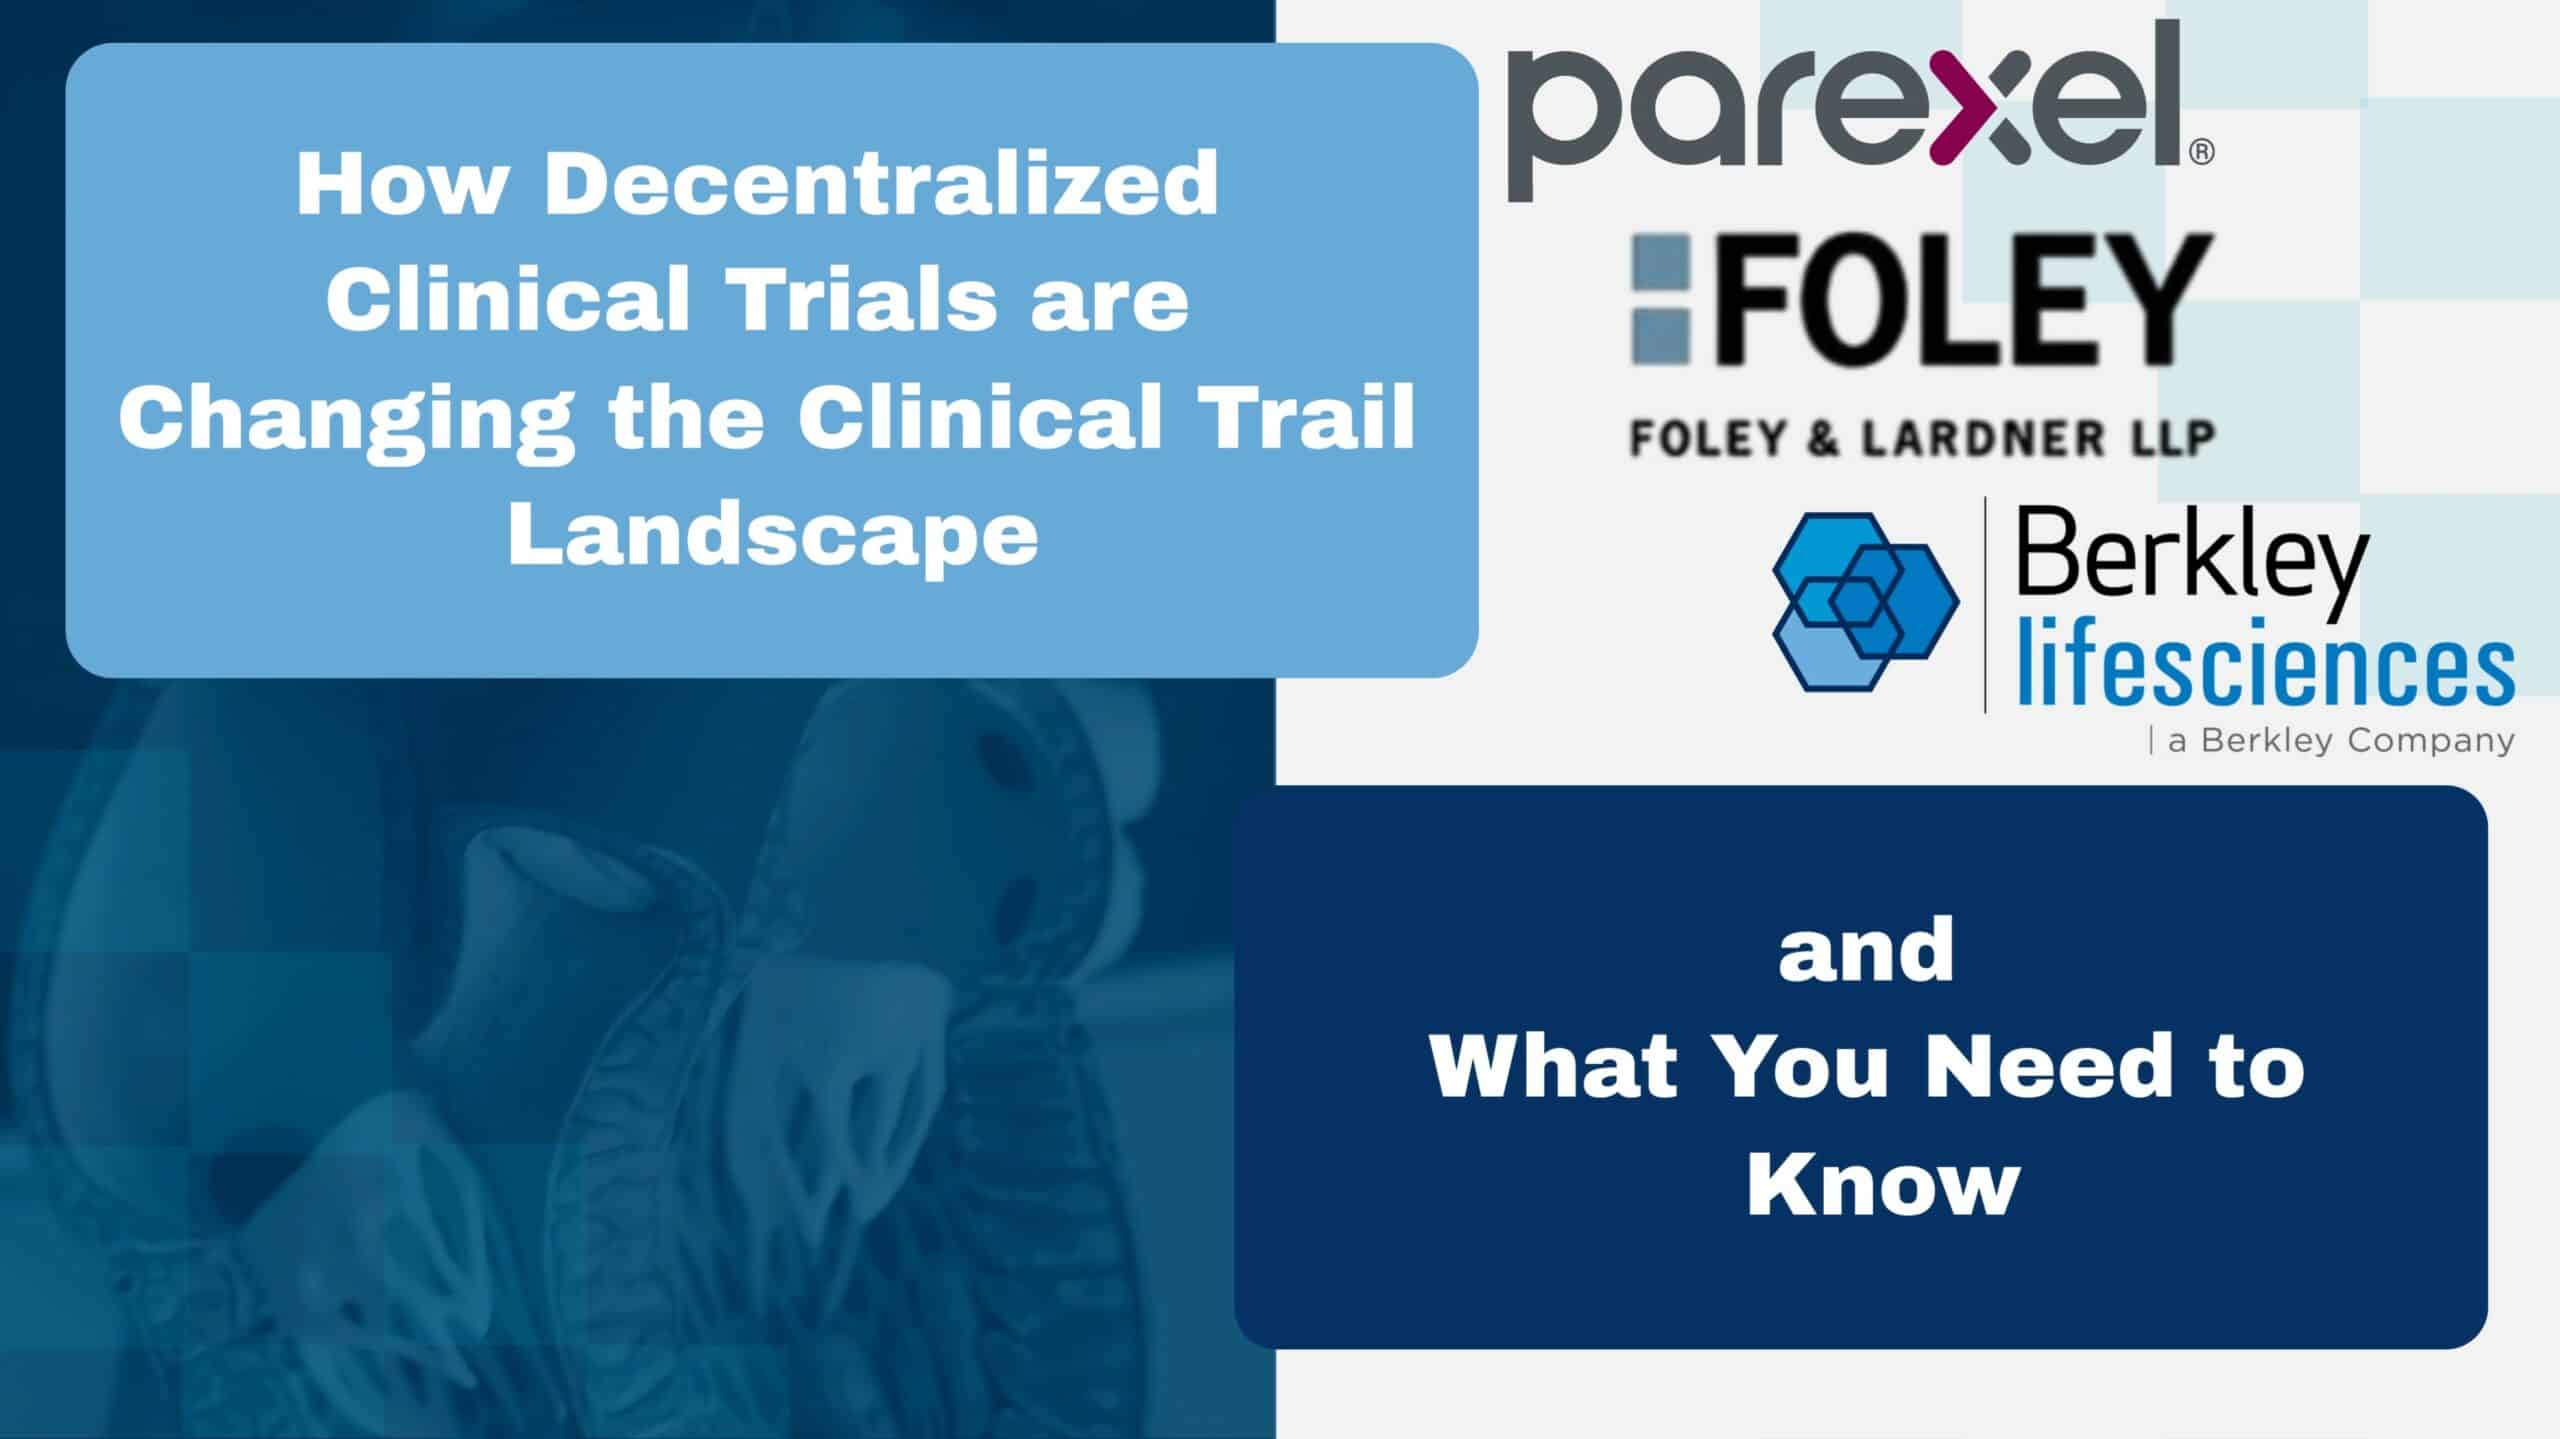 Webinars - How Decentralized Clinical Trials Are Changing the Clinical Trial Landscape Video